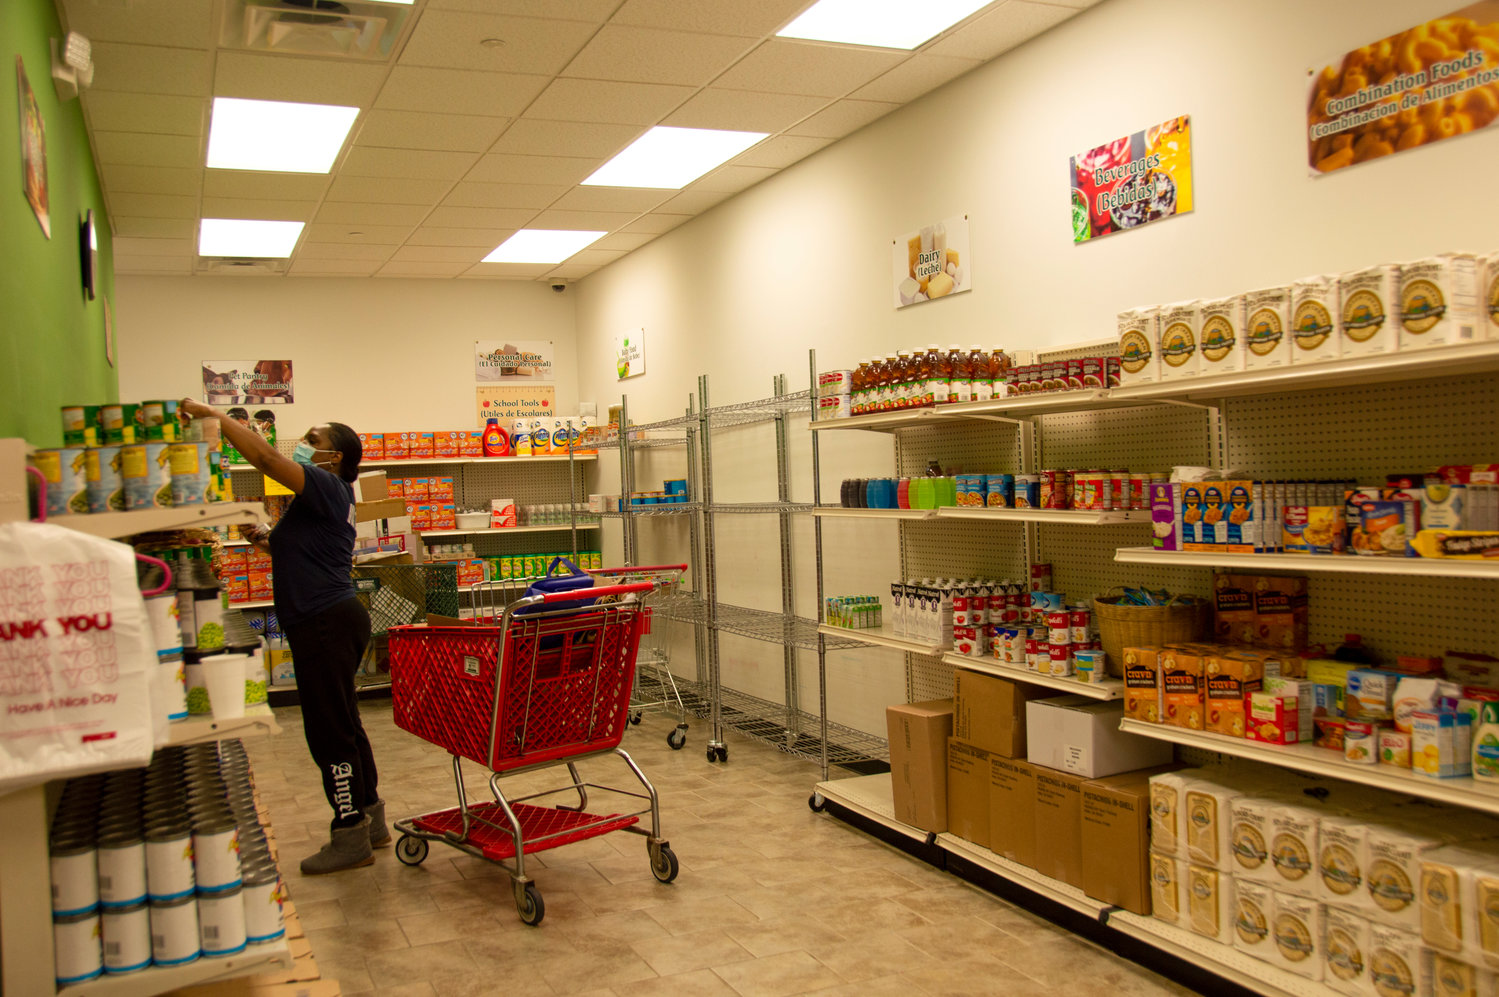 Long Island Cares’ Freeport location struggles to keep up with increasing demand for food assistance amid rising inflation and fluctuating employment.